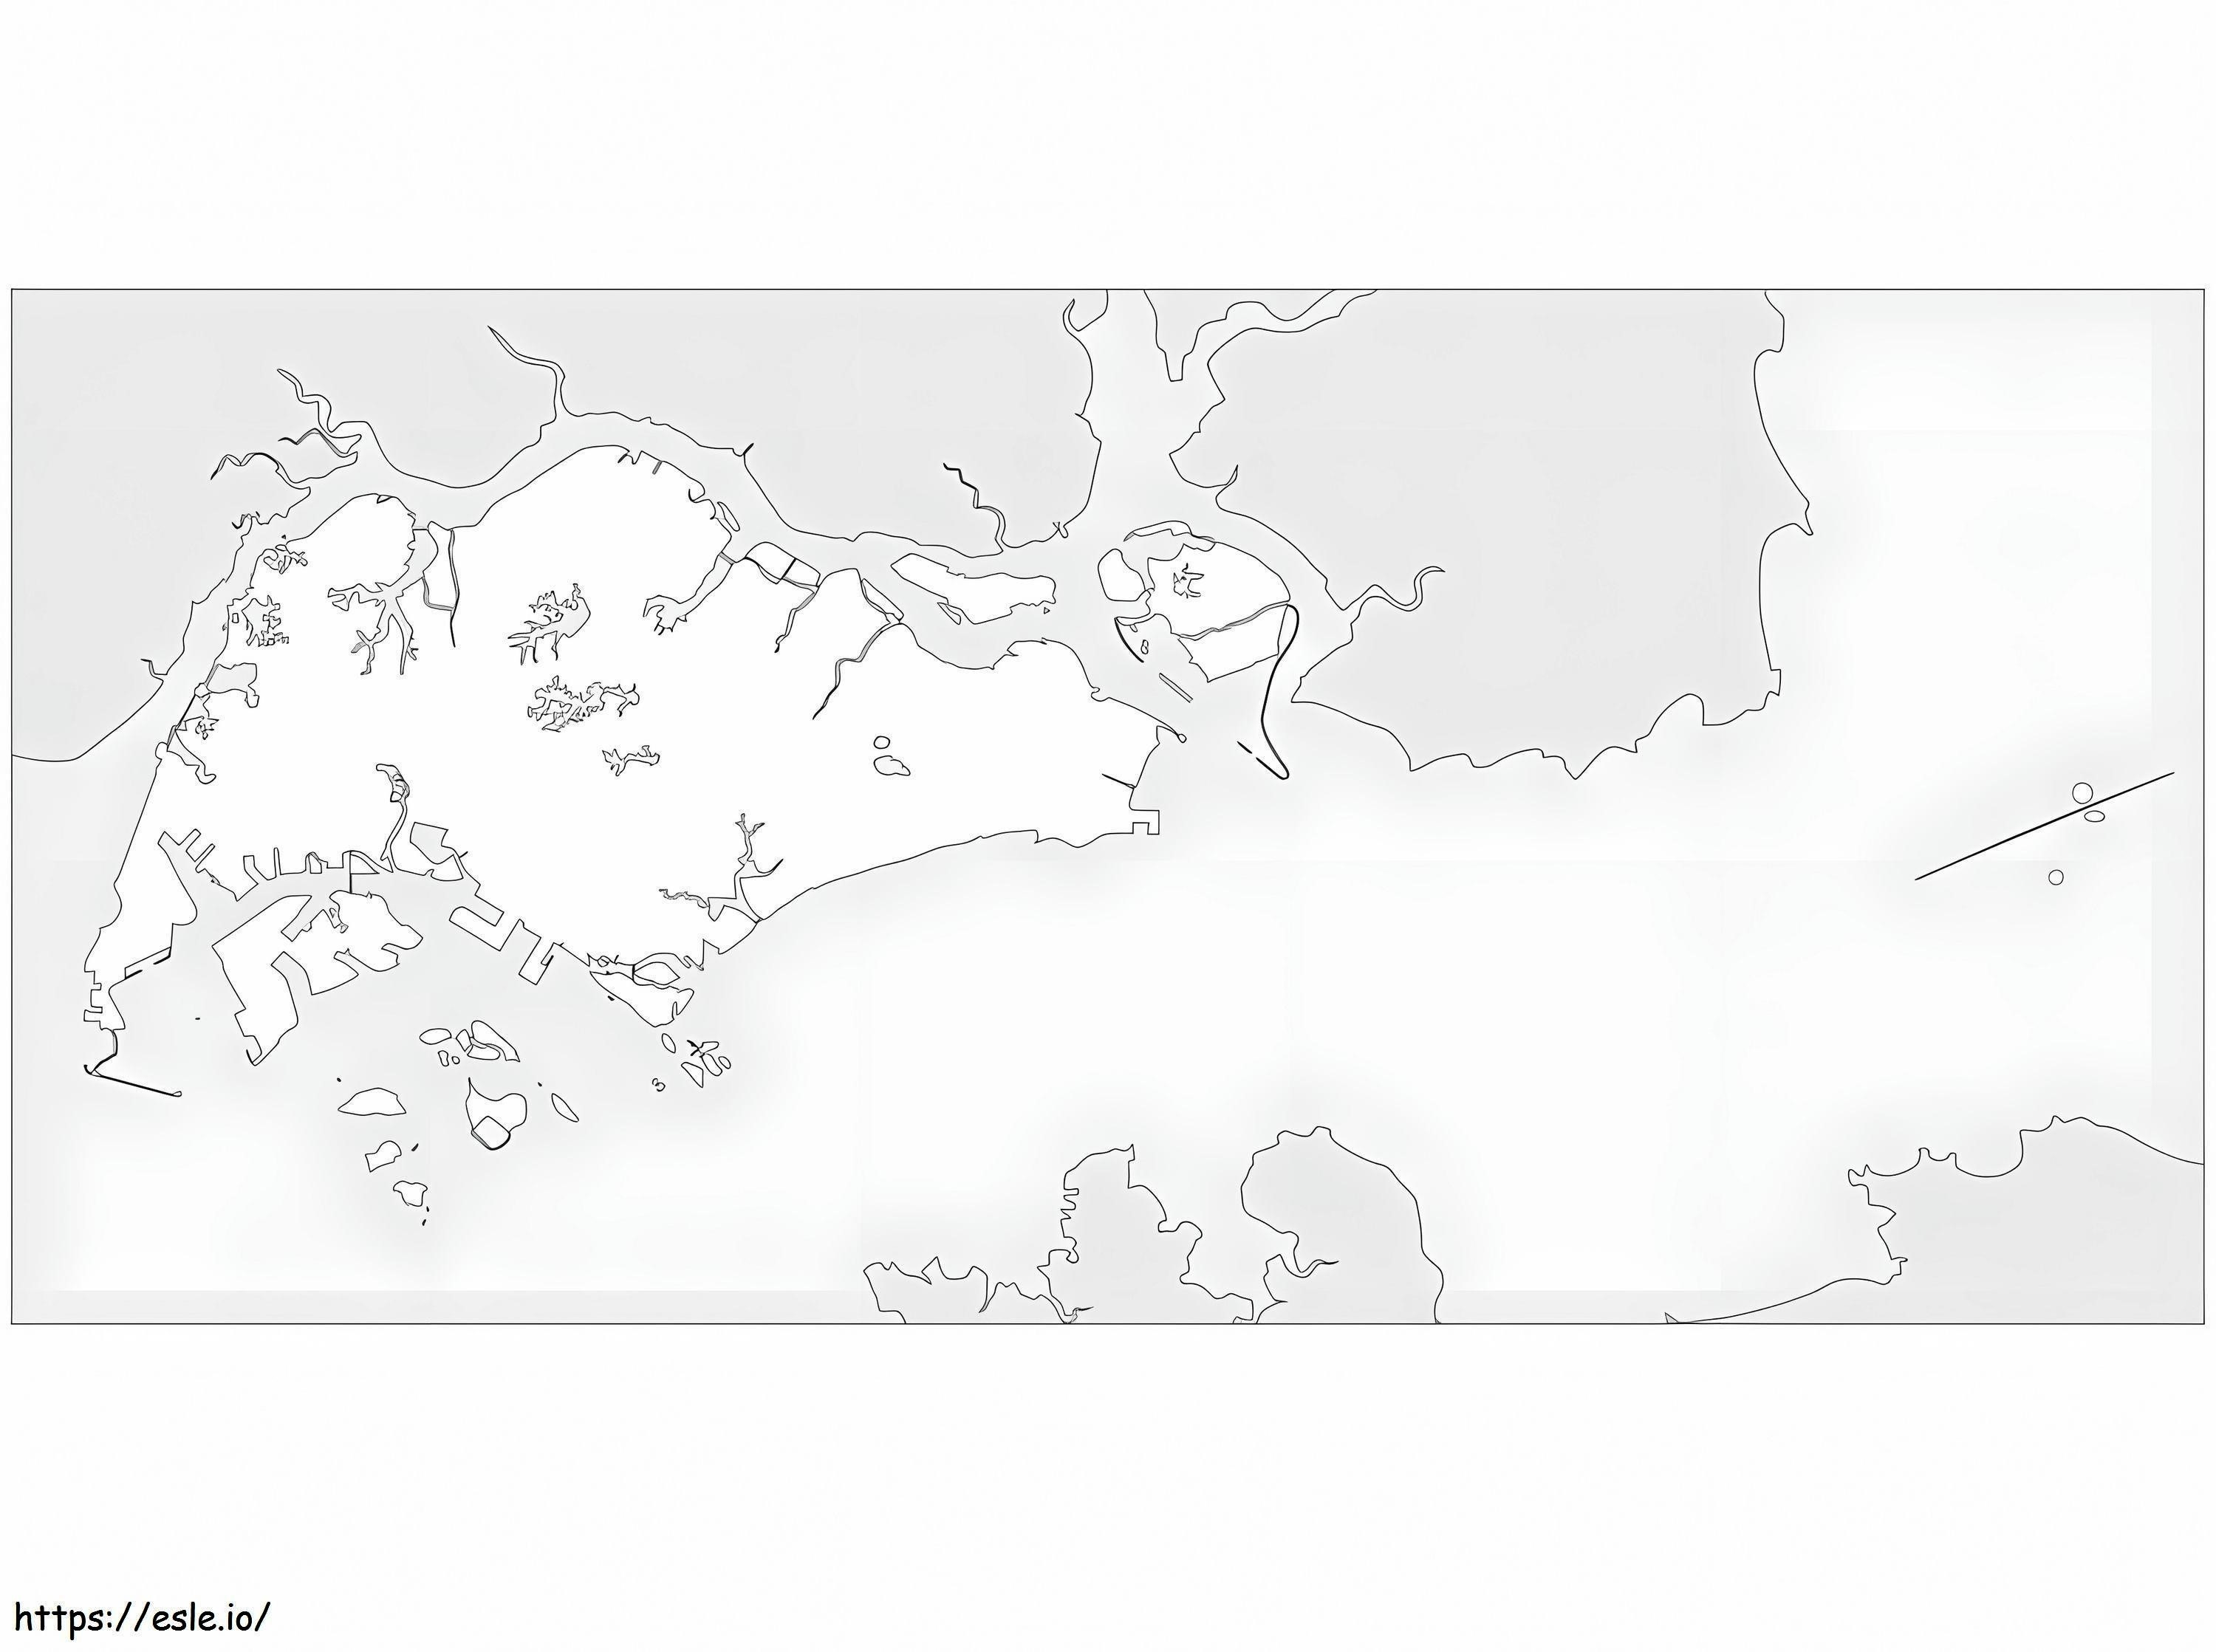 Singapores Map coloring page